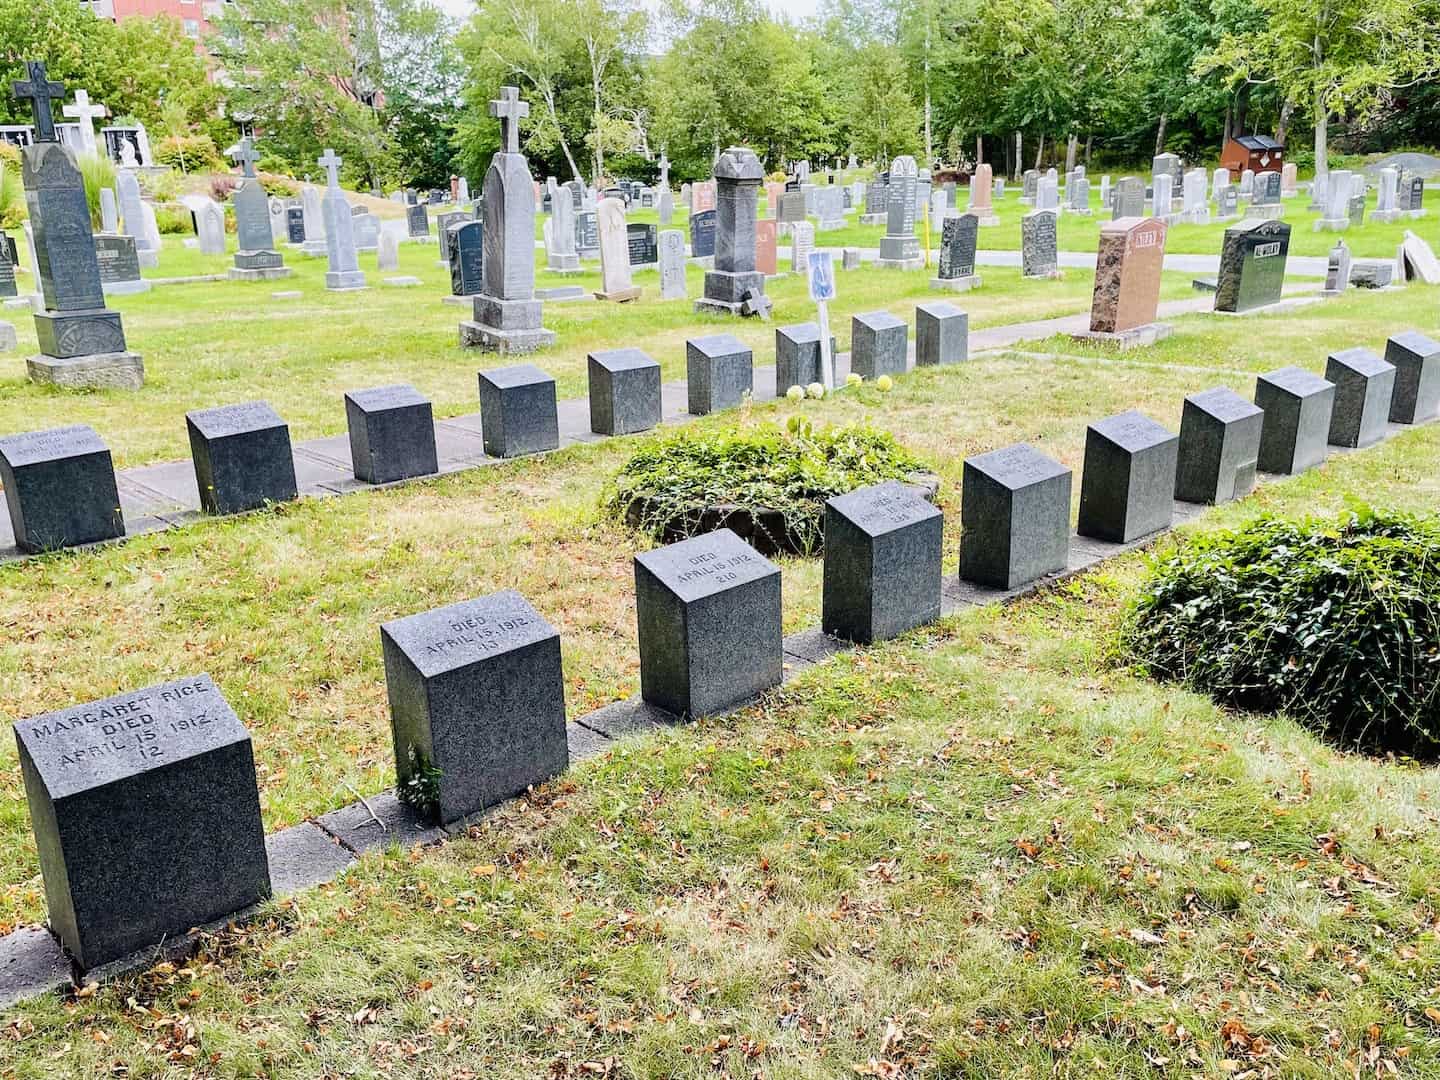 Two rows of headstones of Titanic victims stand in a cemetery in Halifax.